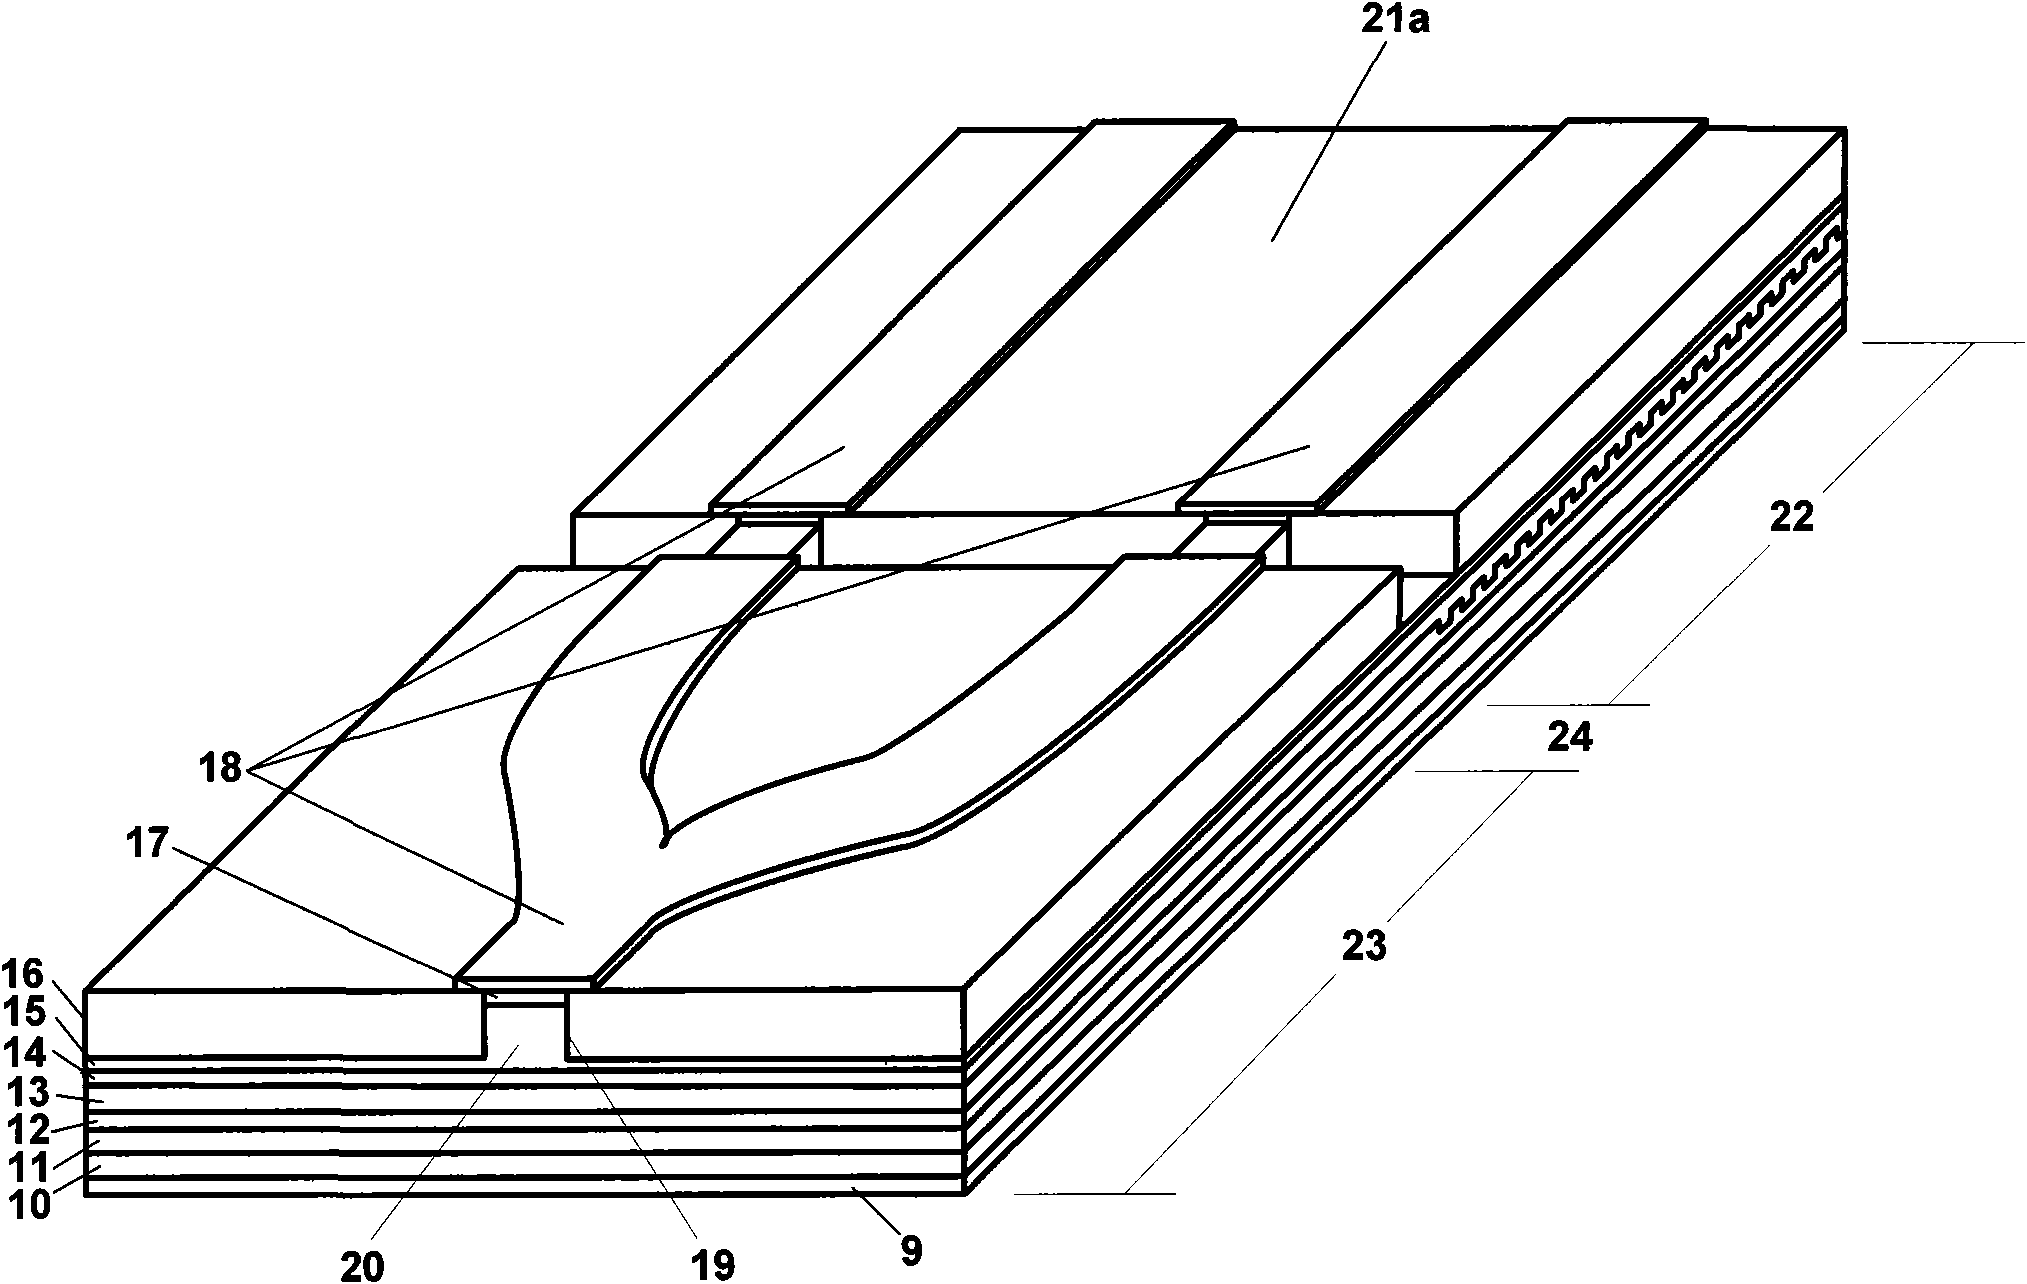 Integrated optoelectronic device based on sideband injection locking and used for generating high-frequency microwaves